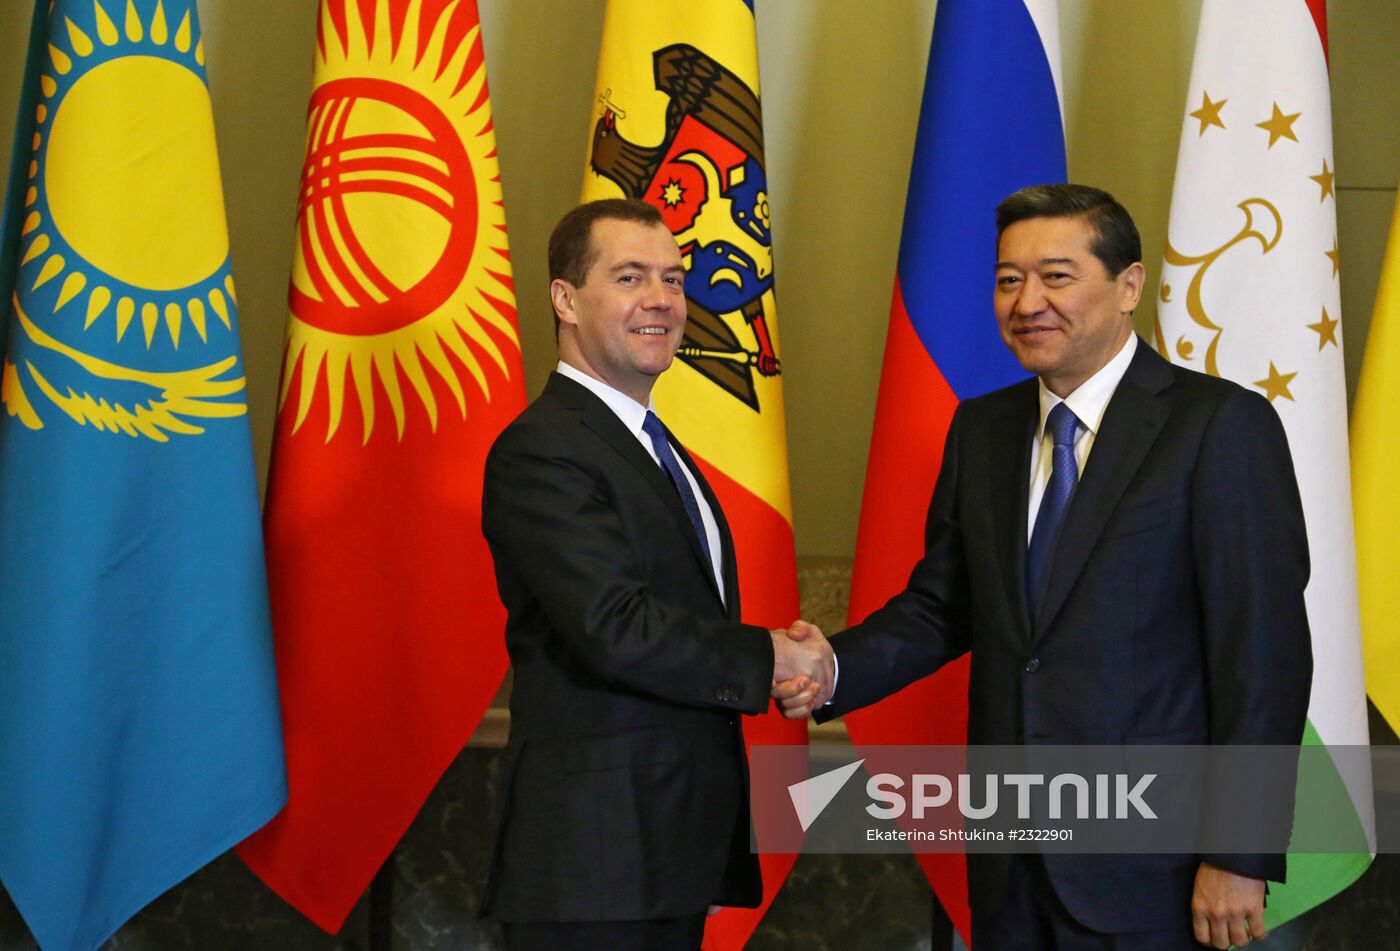 Dmitry Medvedev at CIS Heads of Government Council meeting